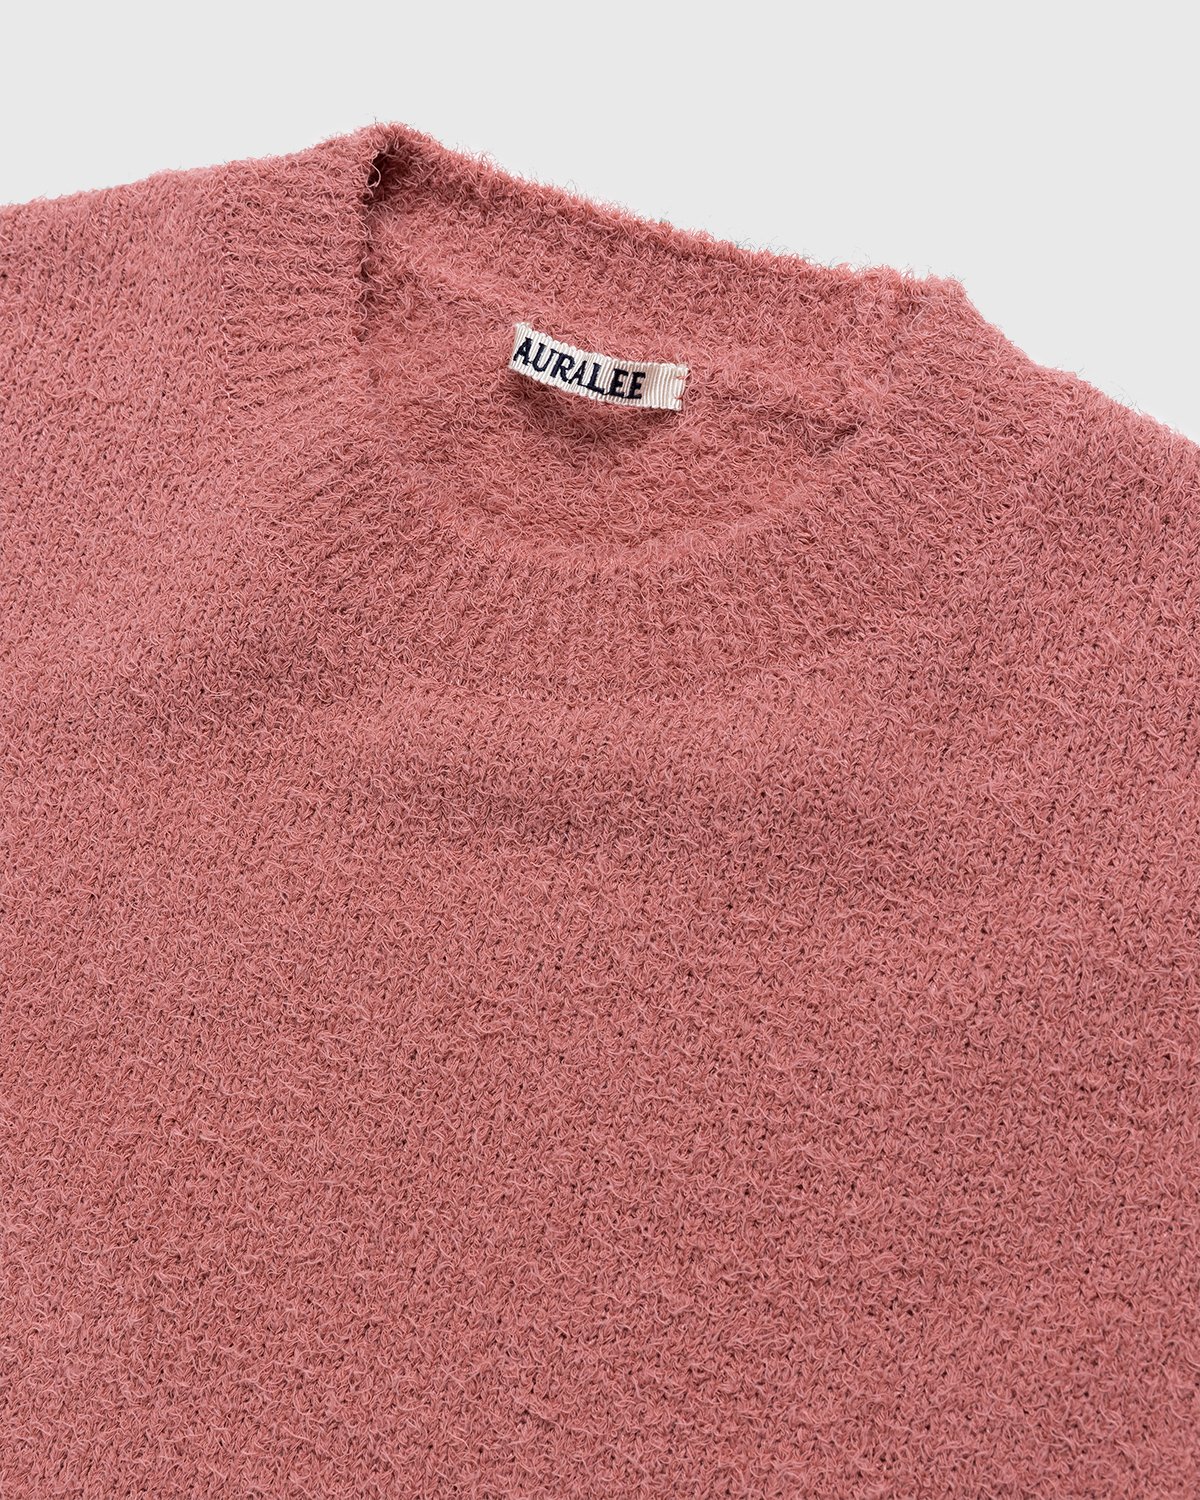 Auralee - Cotton Linen Knit Pullover Pink - Clothing - Pink - Image 4